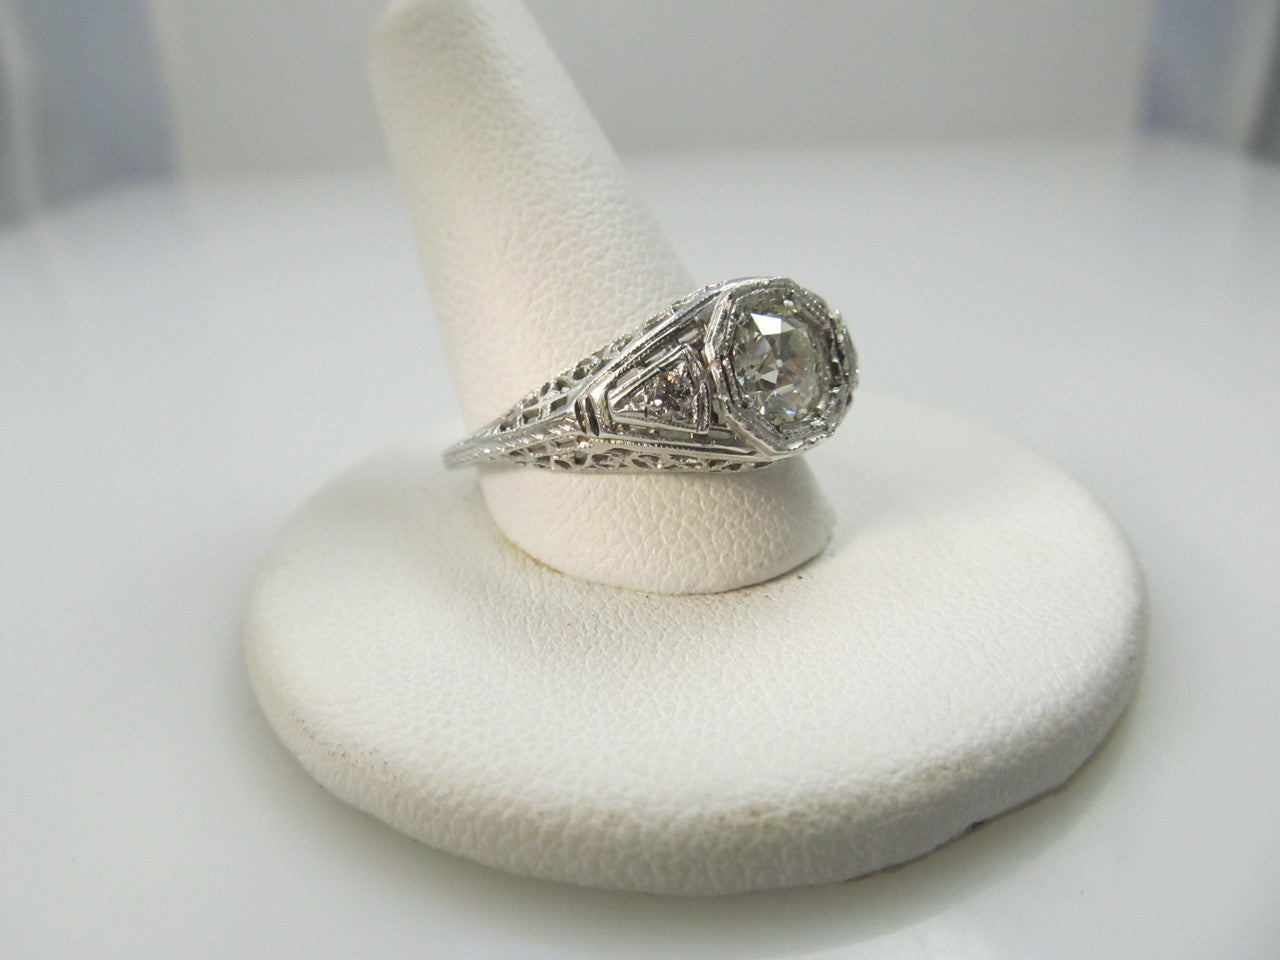 18k White Gold Filigree Engagement Ring With A .75ct Center Diamond, Vs2, F-g